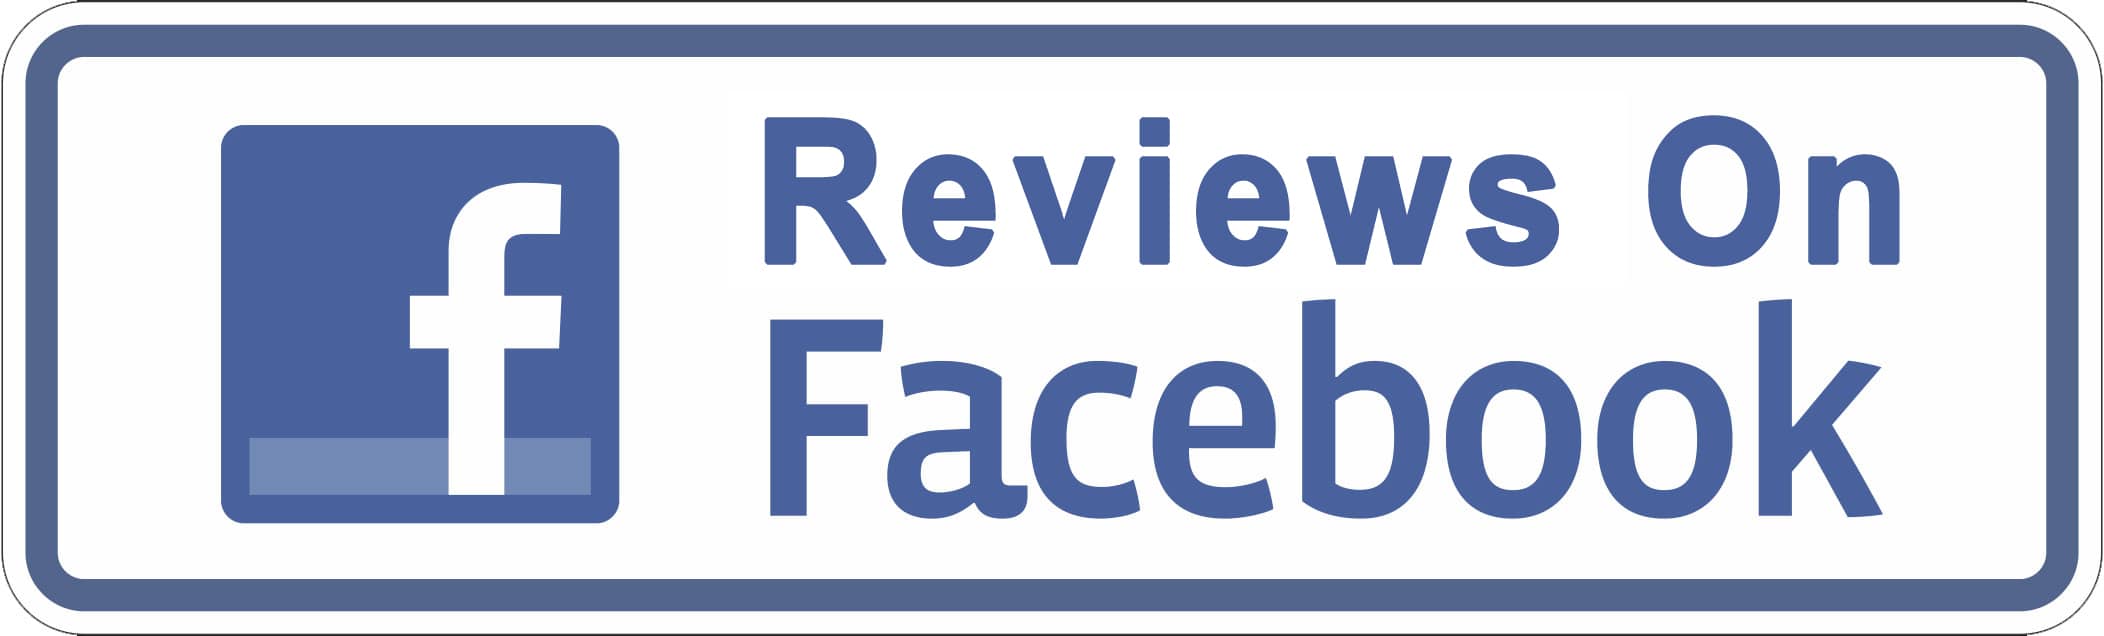 Yelp and Facebook Logo - Grand Blanc BMW Write A Review